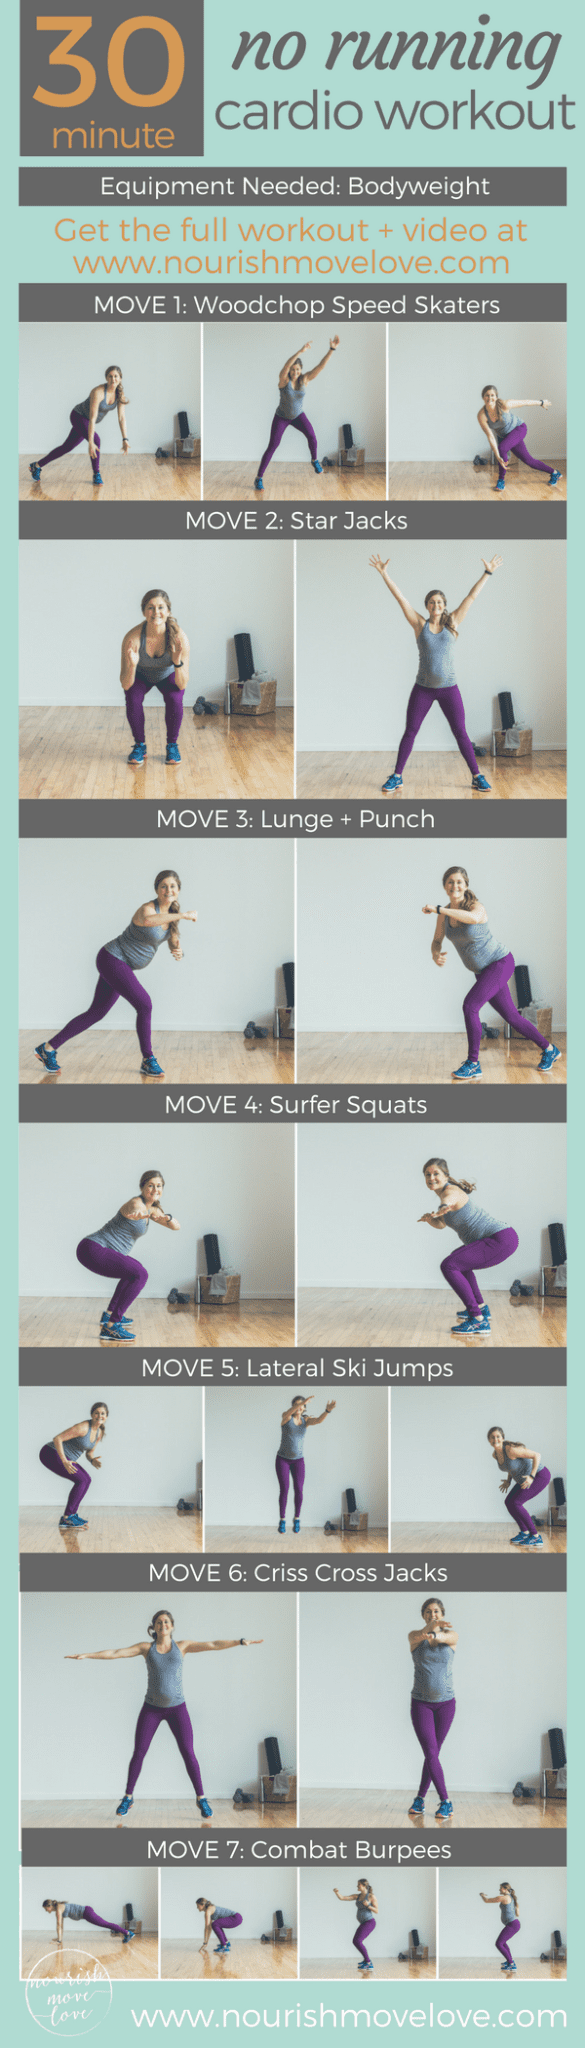 30-Minute, No Running At-Home Cardio Workout | www.nourishmovelove.com